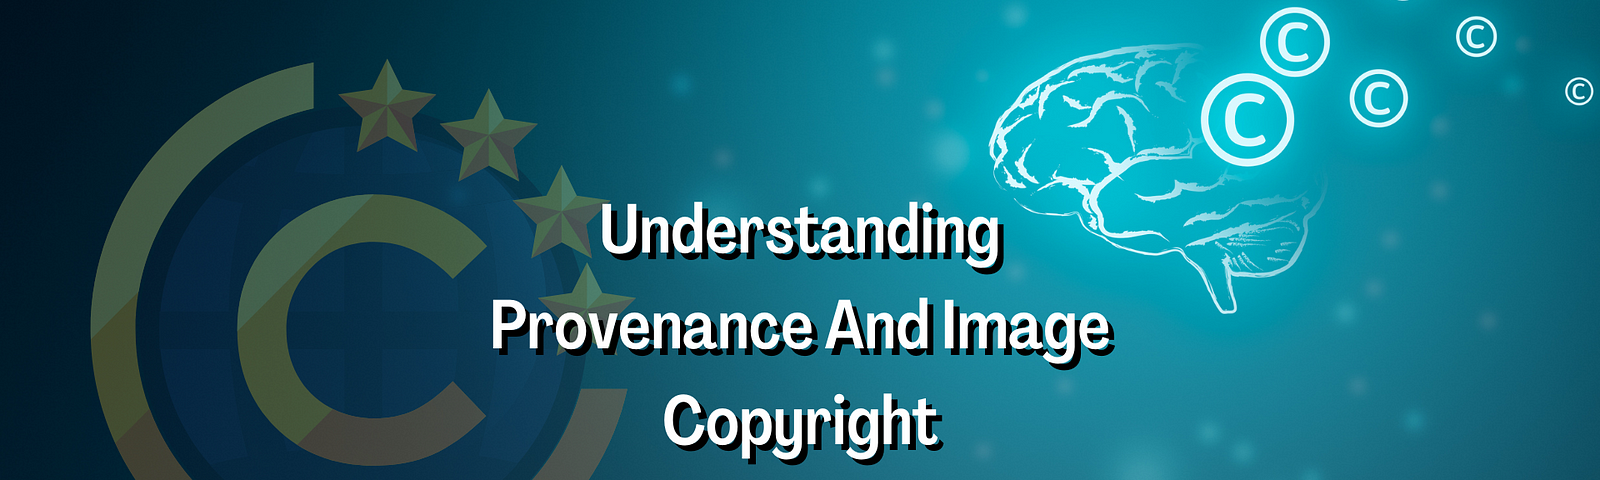 image provenance and copyright